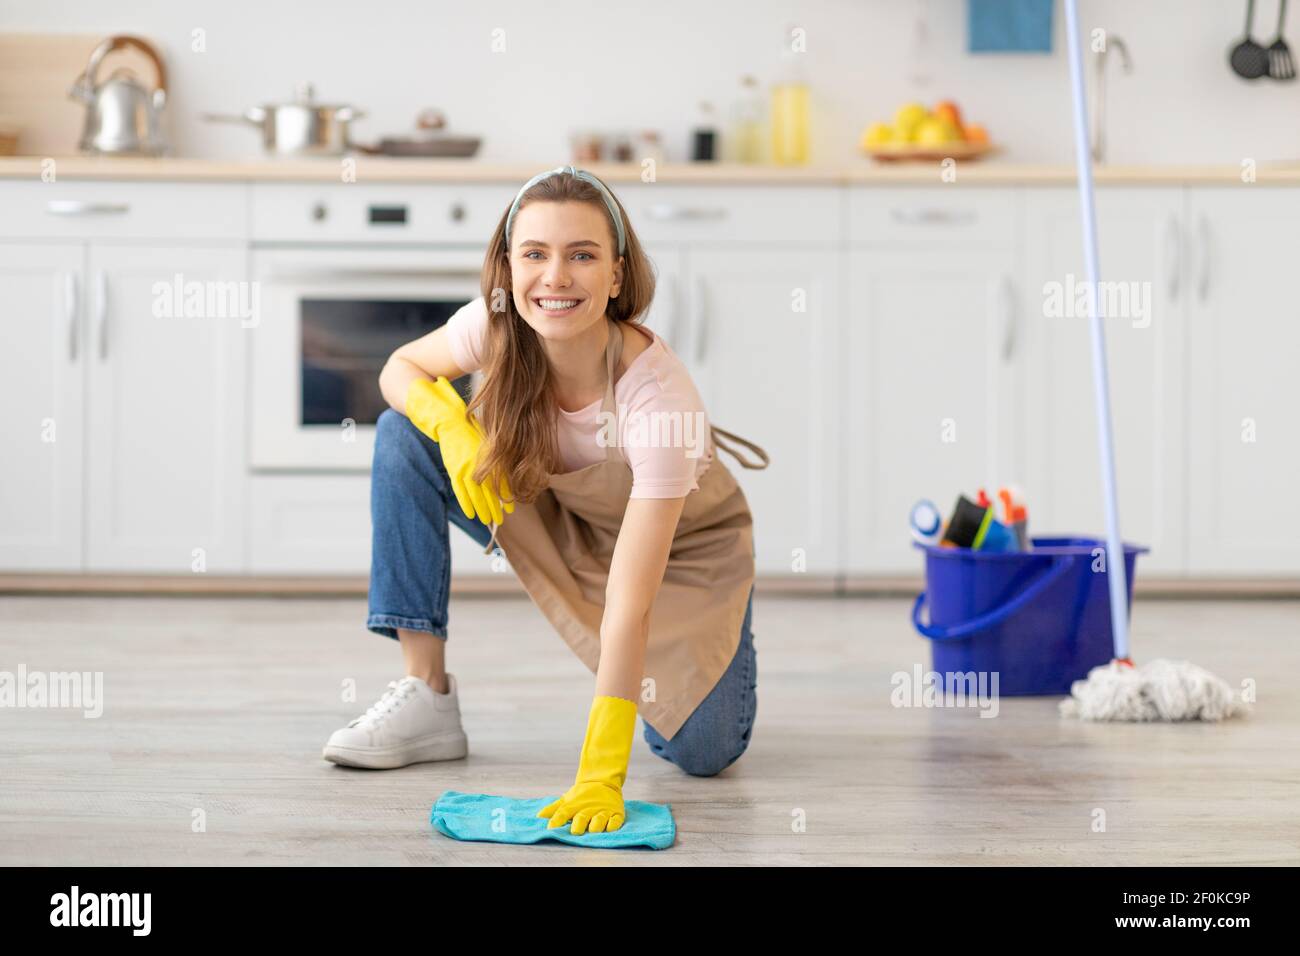 https://c8.alamy.com/comp/2F0KC9P/house-keeping-concept-happy-young-woman-wiping-floor-in-kitchen-wearing-rubber-gloves-using-cleaning-supplies-2F0KC9P.jpg